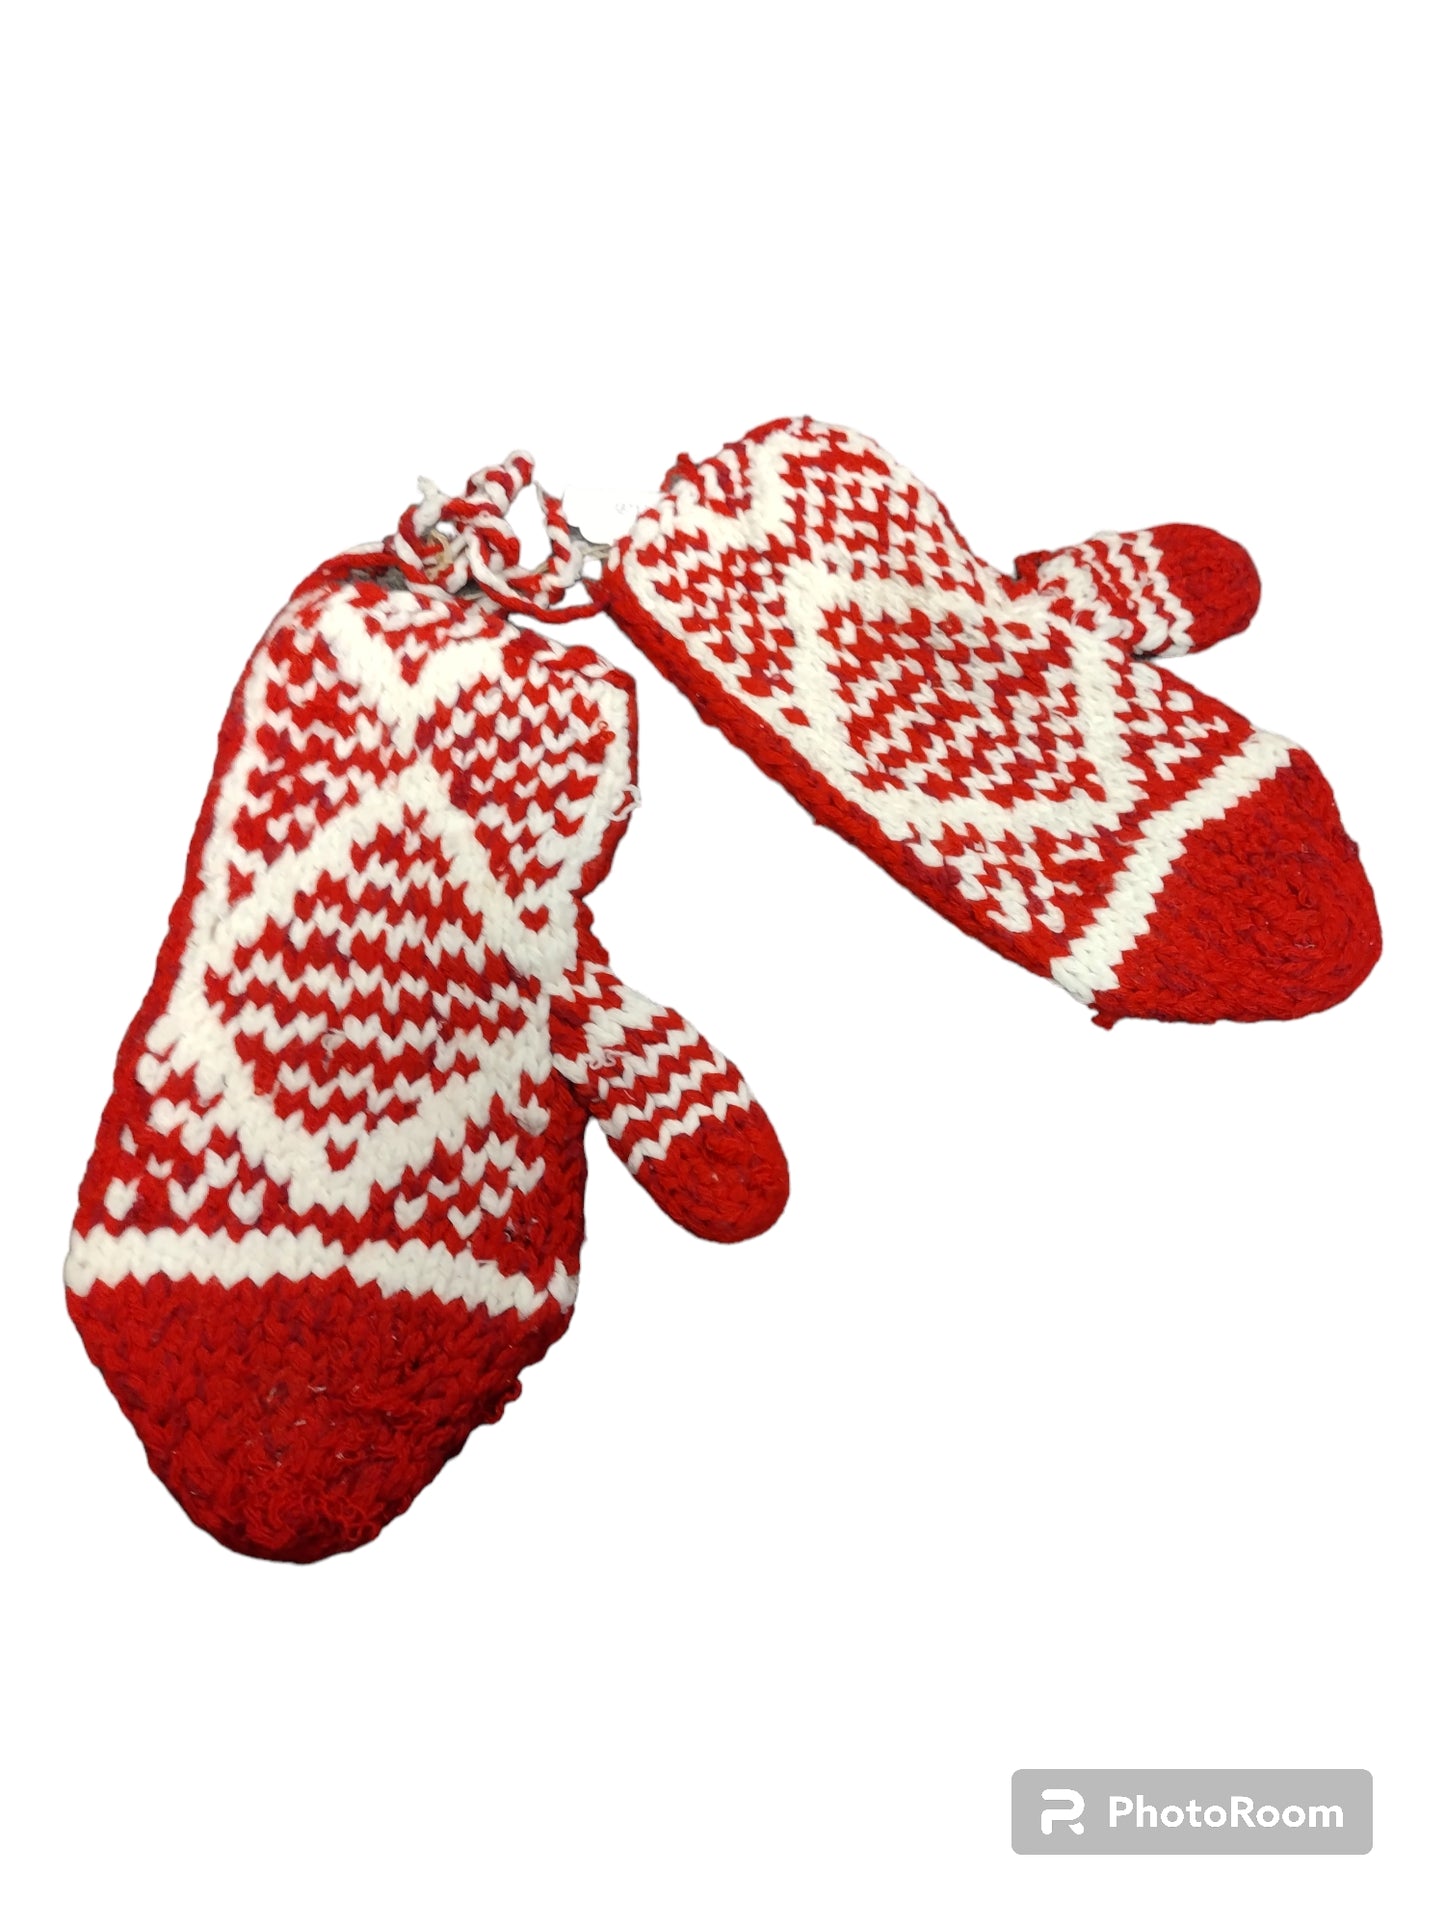 Wool Mittens (Adult Size)